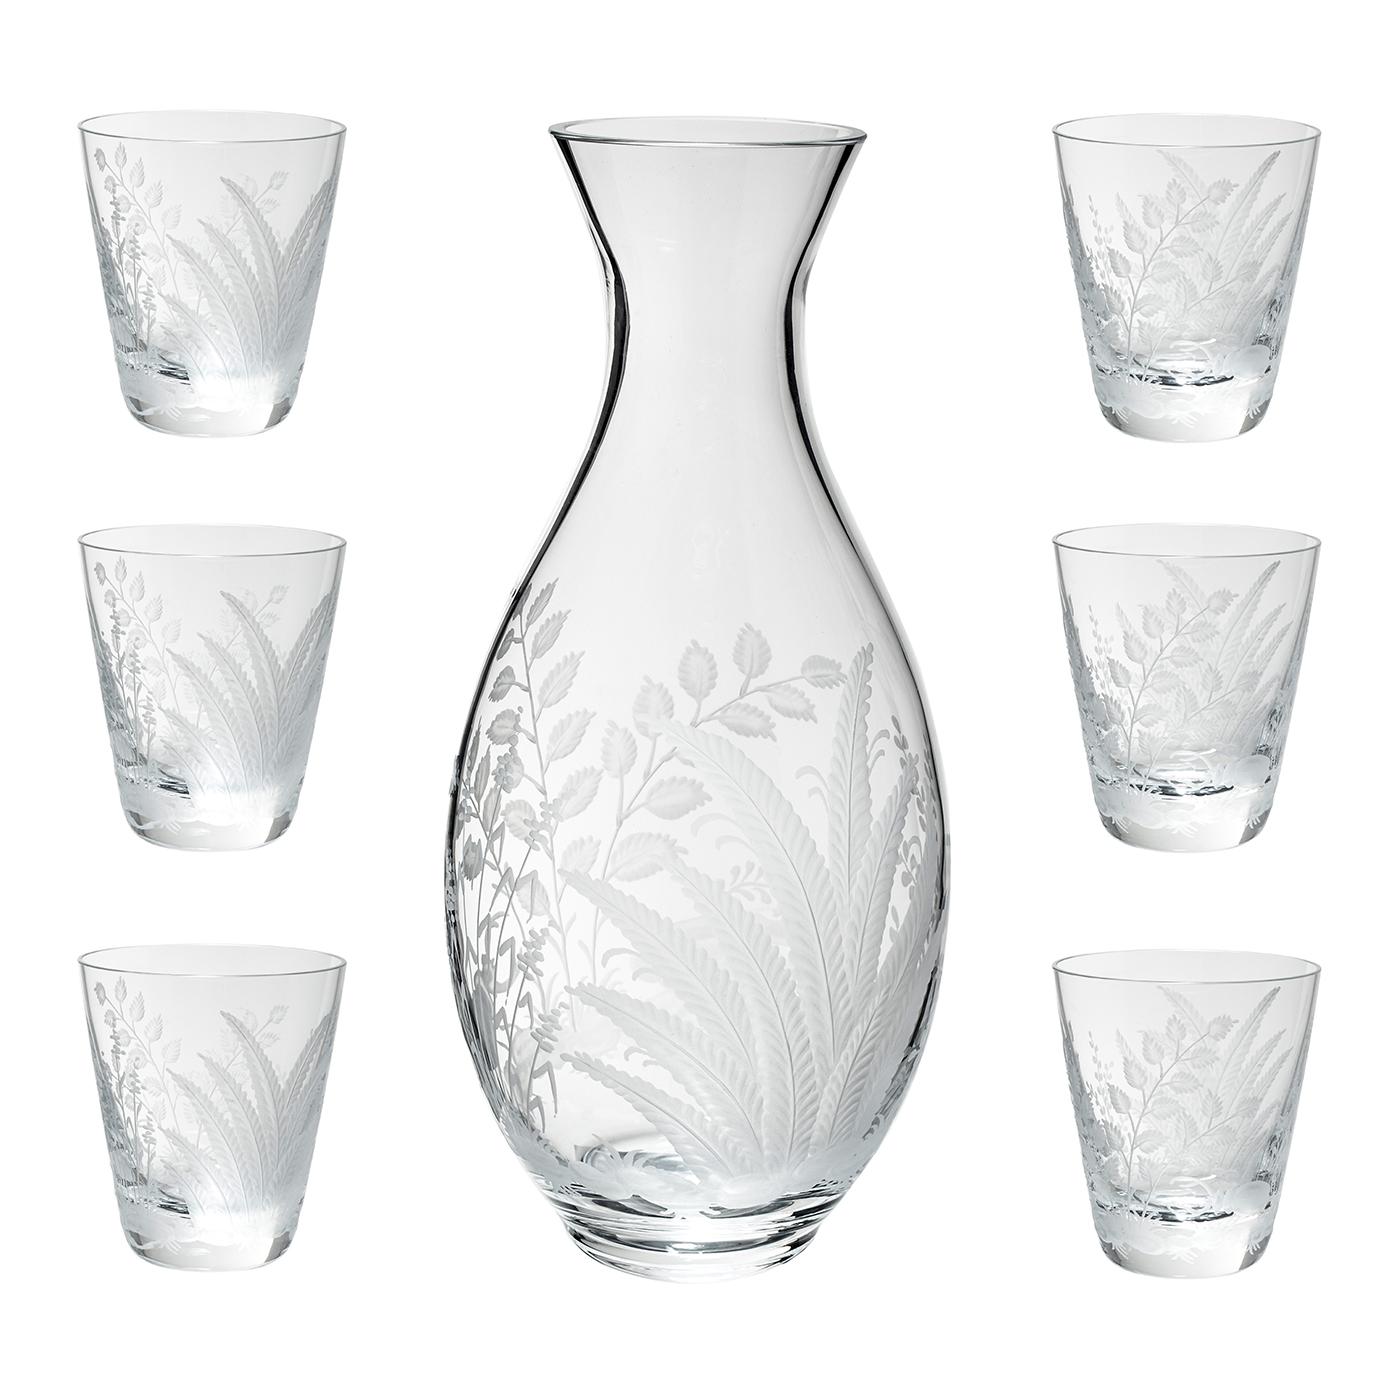 country style glassware